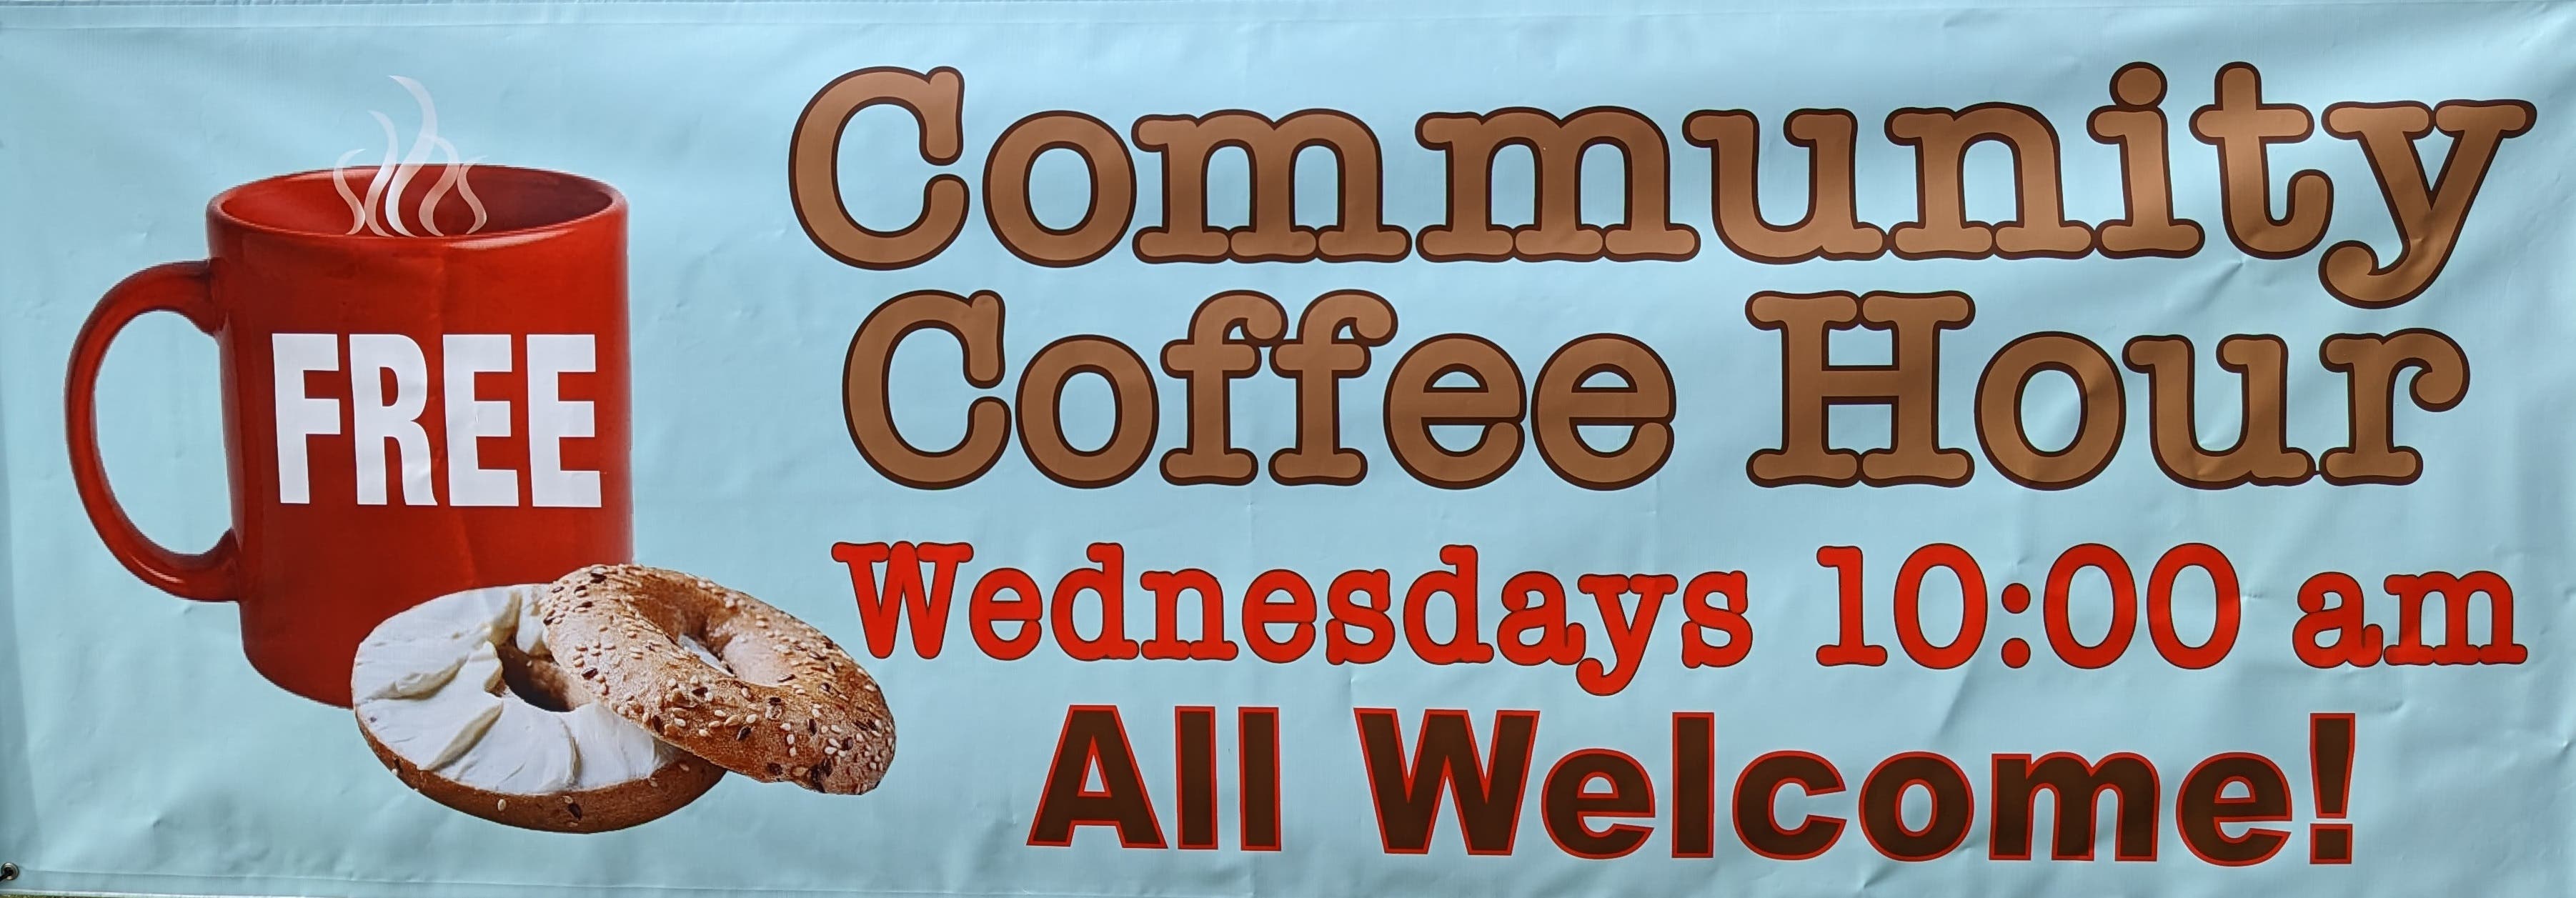 Community Coffee Hour - All are welcome... St. James Episcopal Church